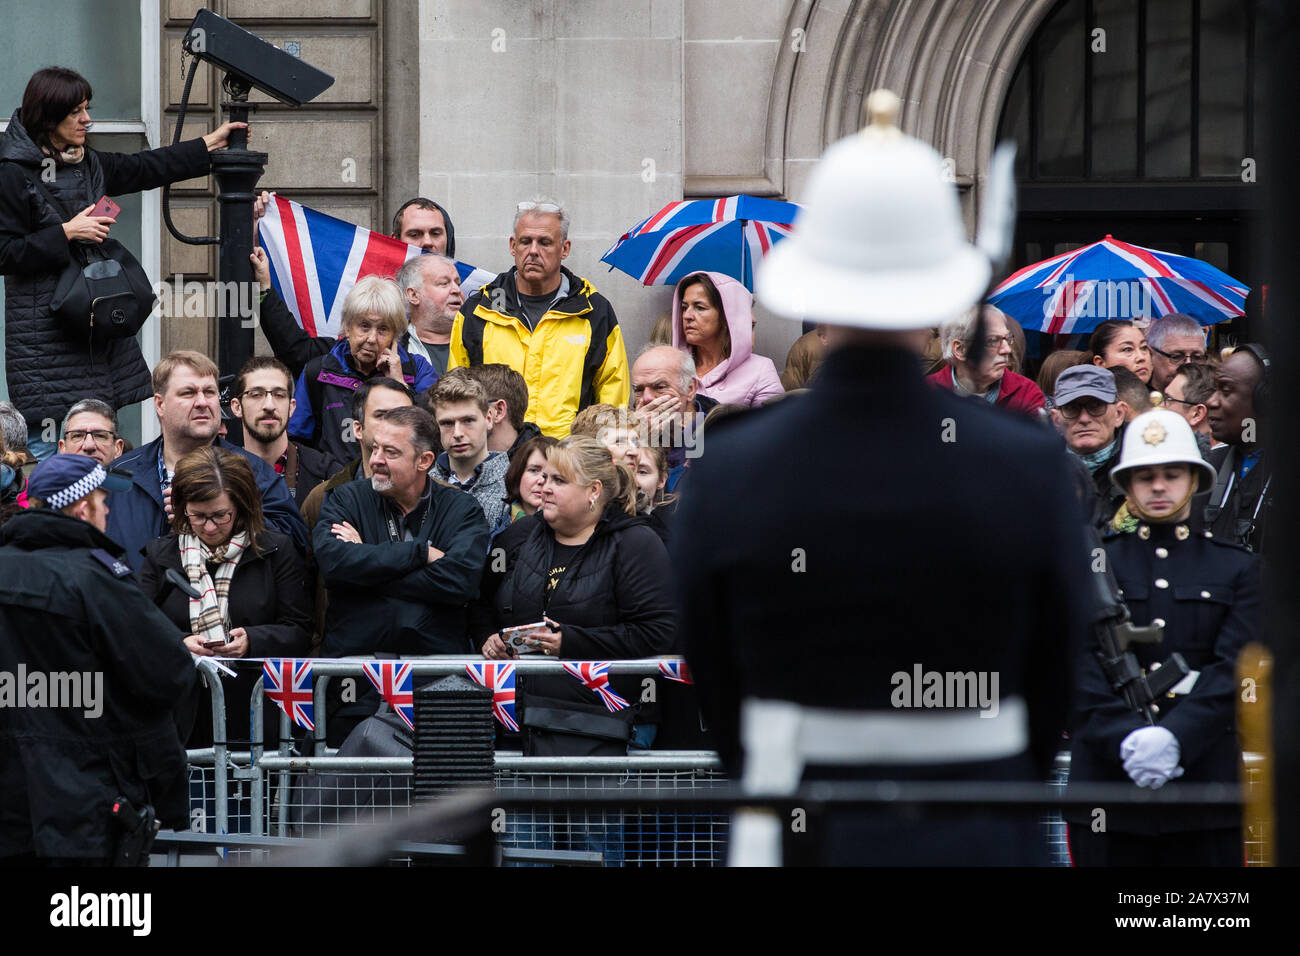 London, UK. 14 October, 2019. Pro-Brexit activists in Parliament Street await the arrival of the Queen en route to the State Opening of Parliament. Cr Stock Photo